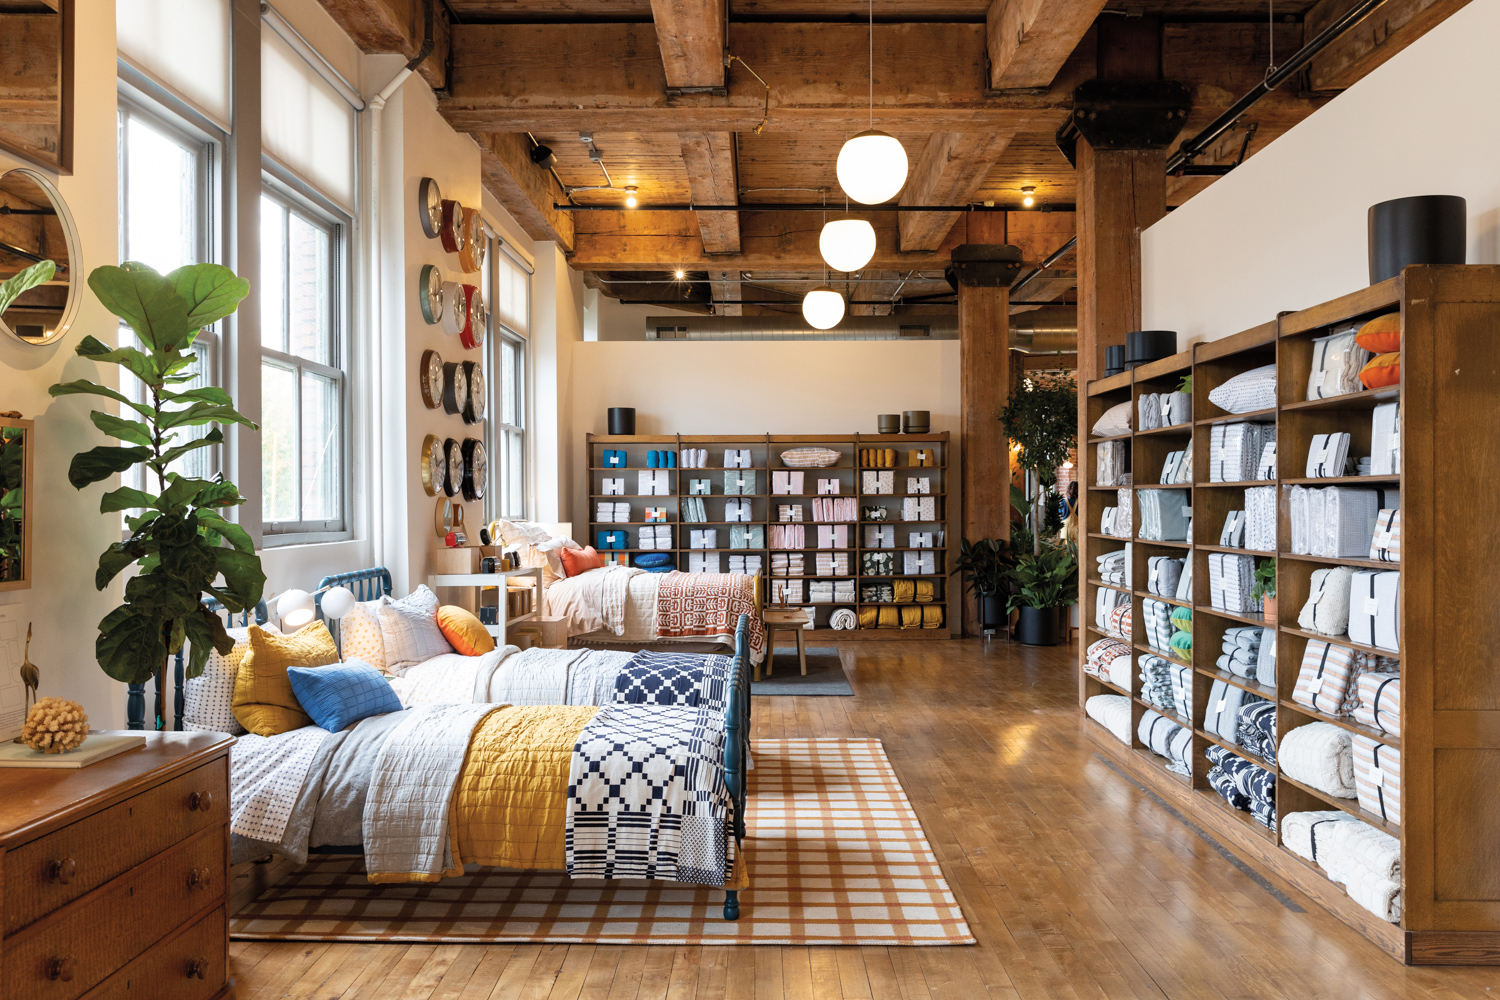 warm showroom by Schoolhouse with beds, linens, and wood